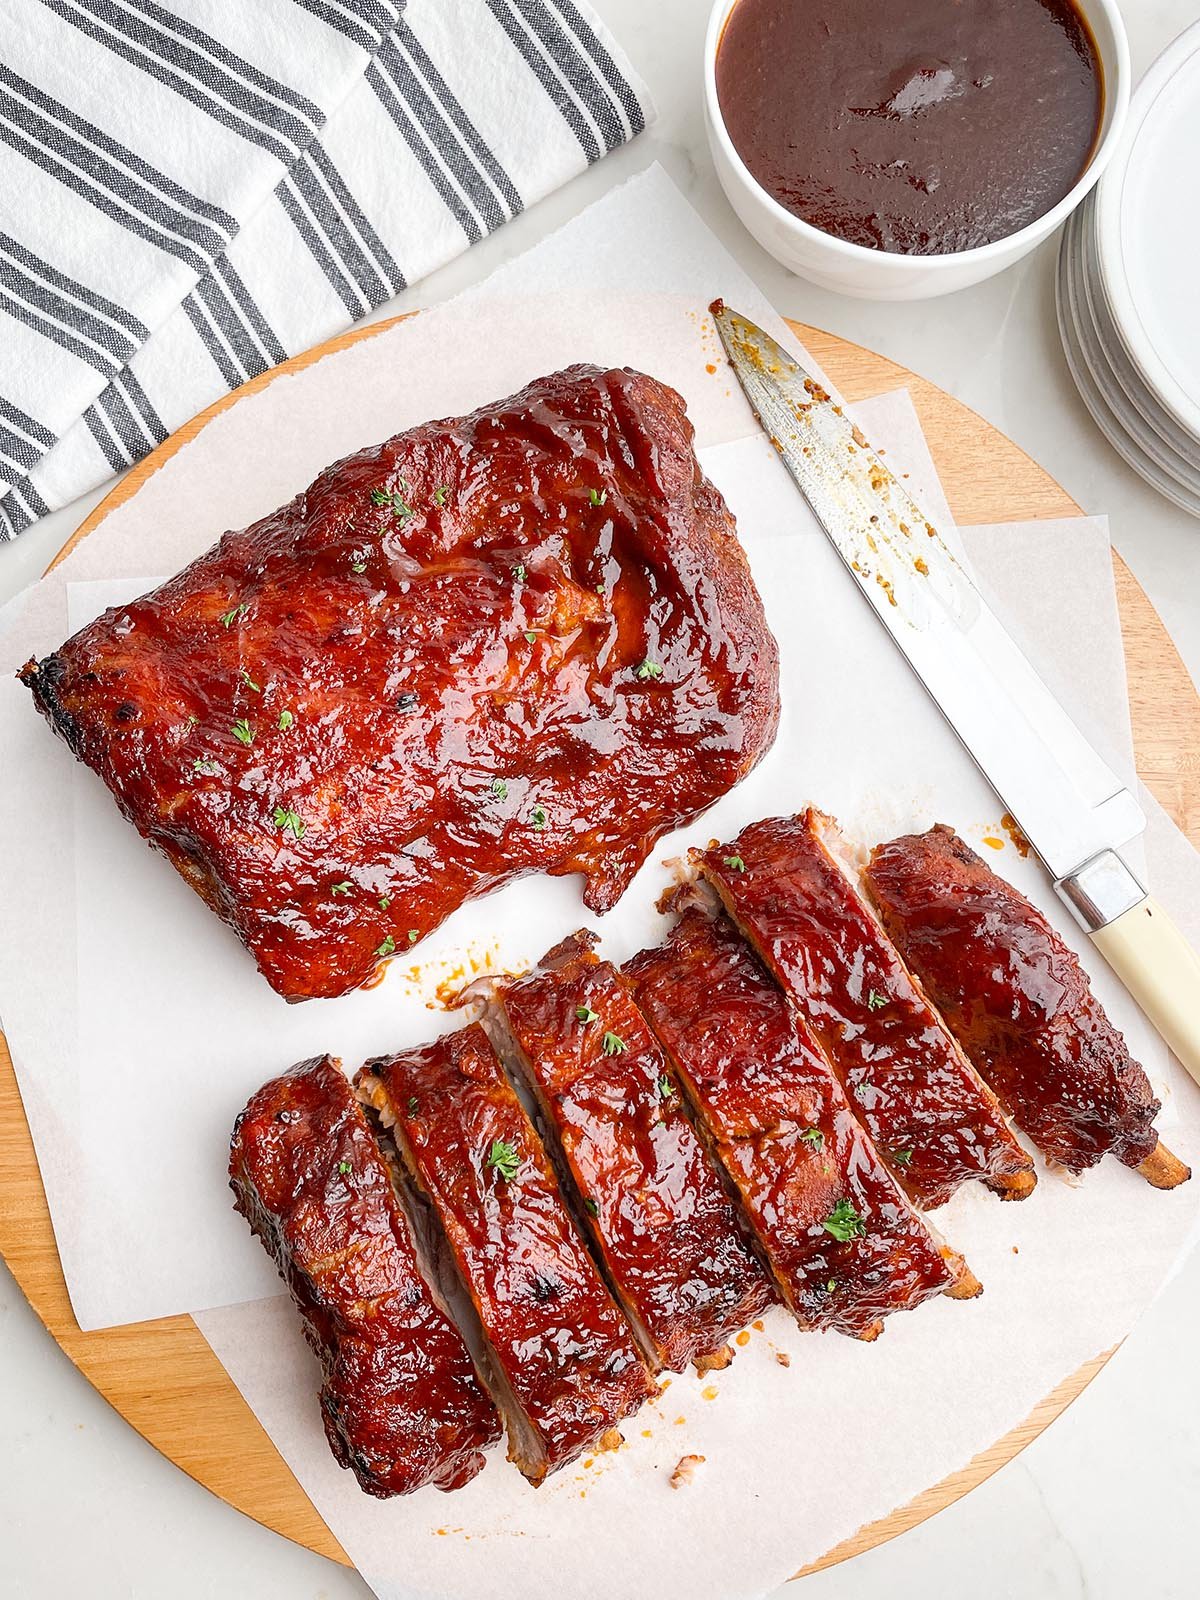 two half racks of ribs on white parchment paper on a wooden cutting board next to a knife.